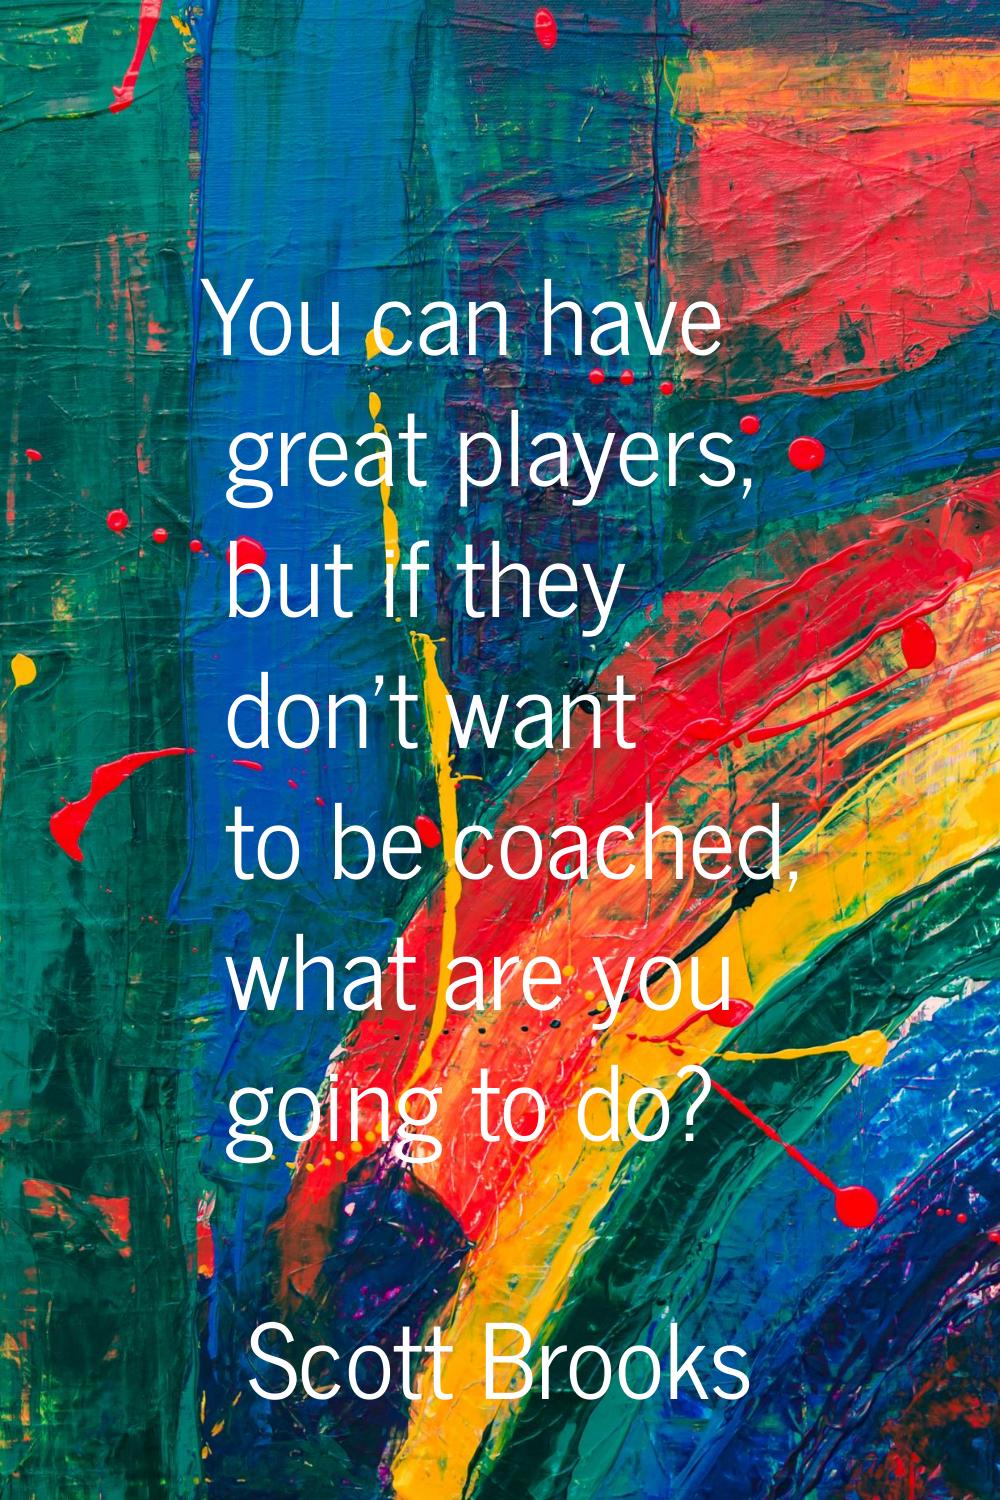 You can have great players, but if they don't want to be coached, what are you going to do?